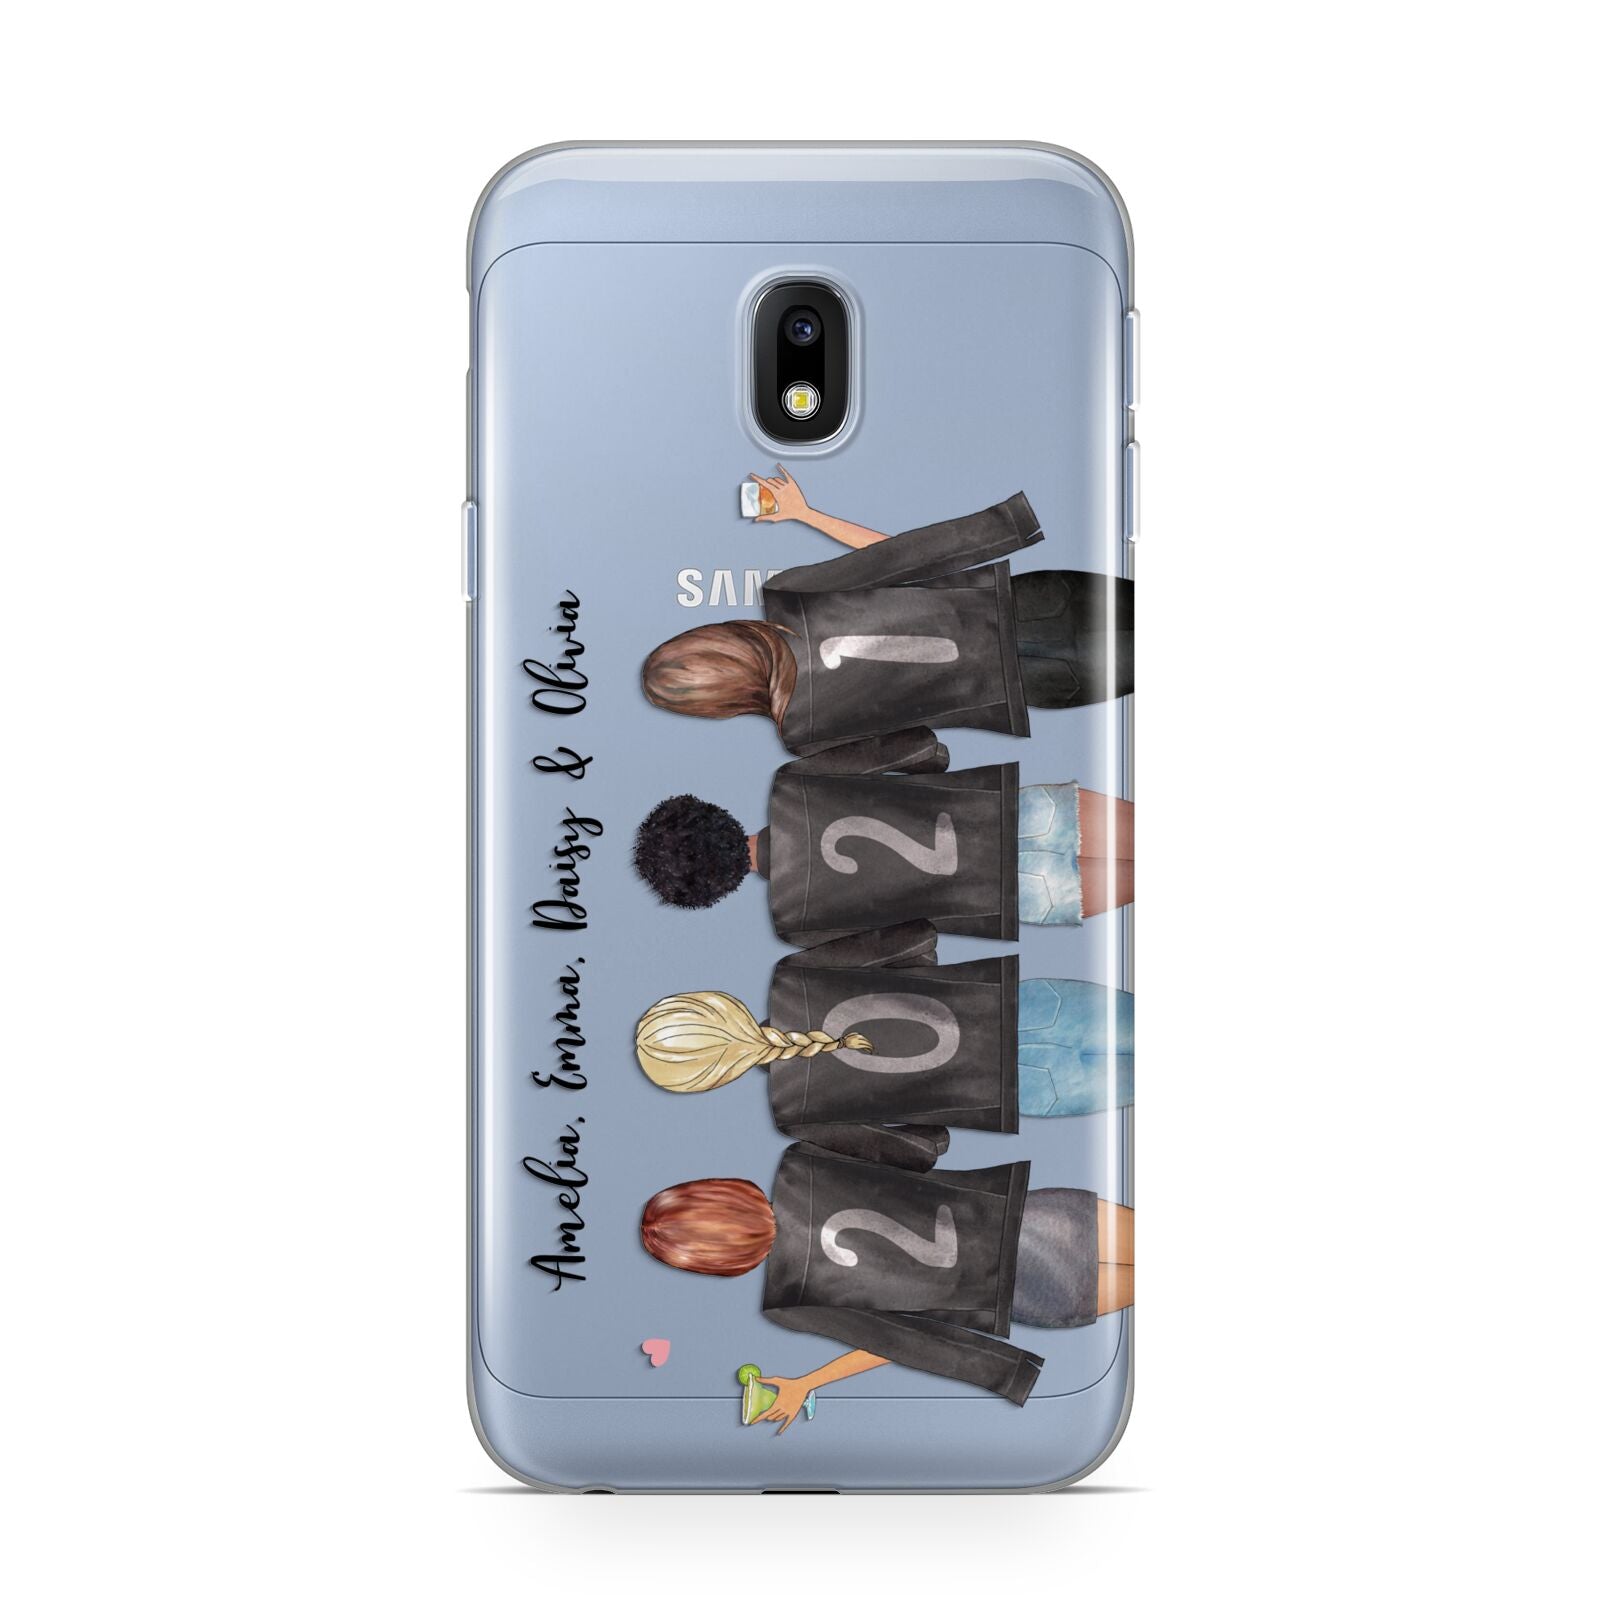 4 Best Friends with Names Samsung Galaxy J3 2017 Case